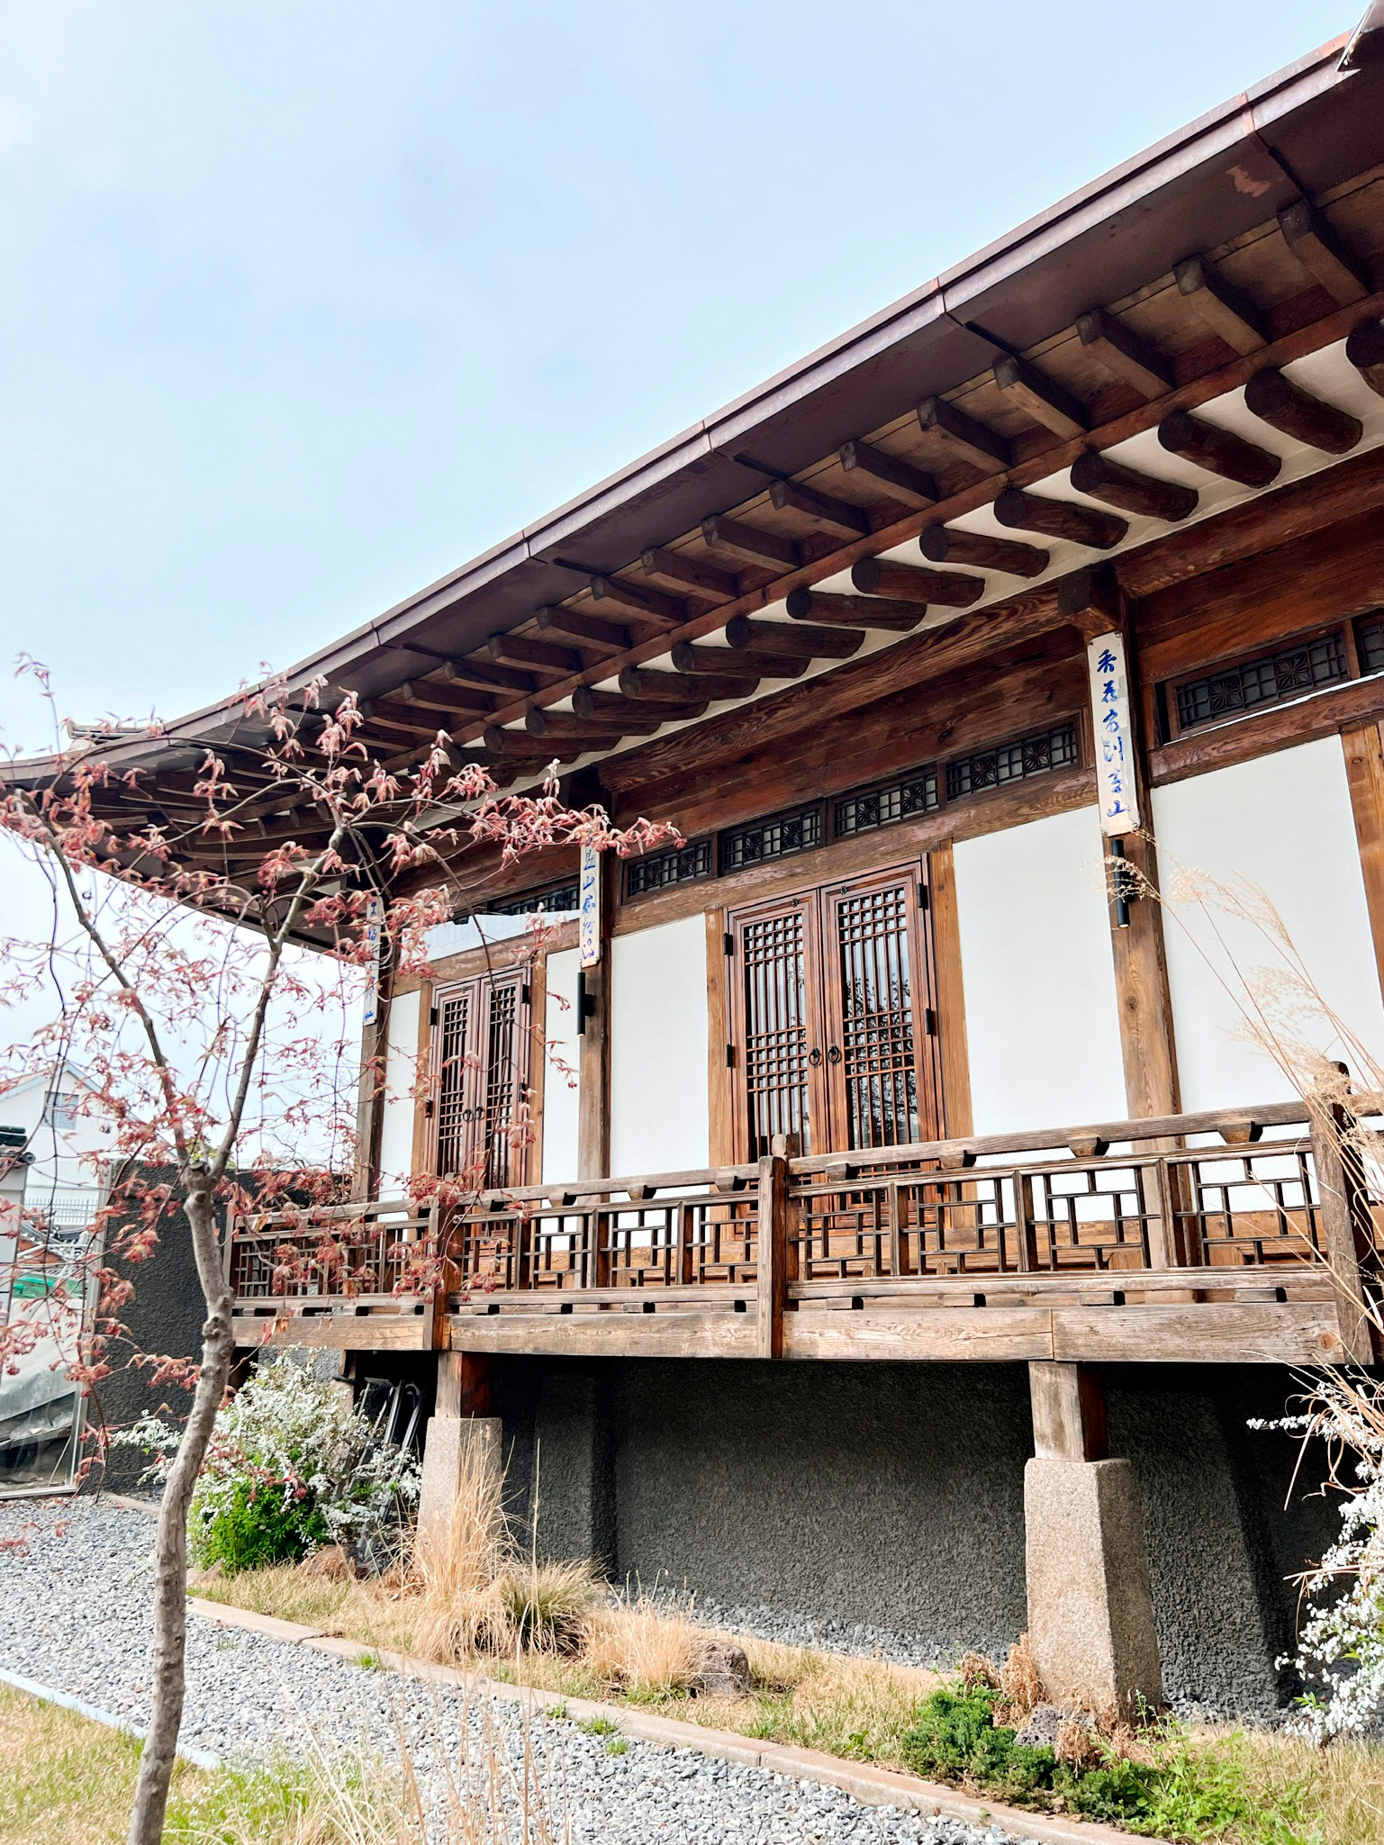 A wooden structure in South Korea, surrounded by grass and blossoming trees.